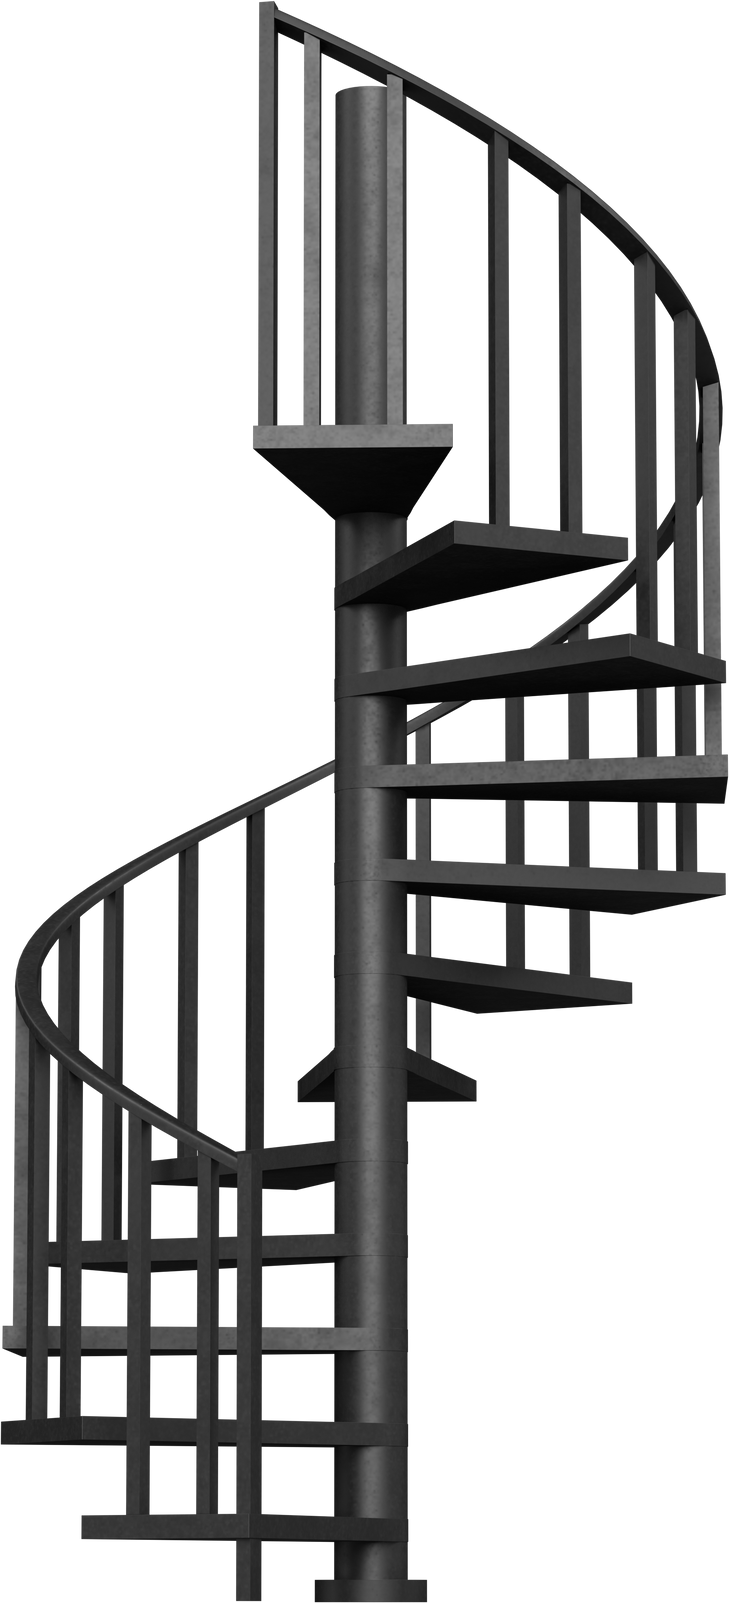 3D rendering illustration of a spiral staircase